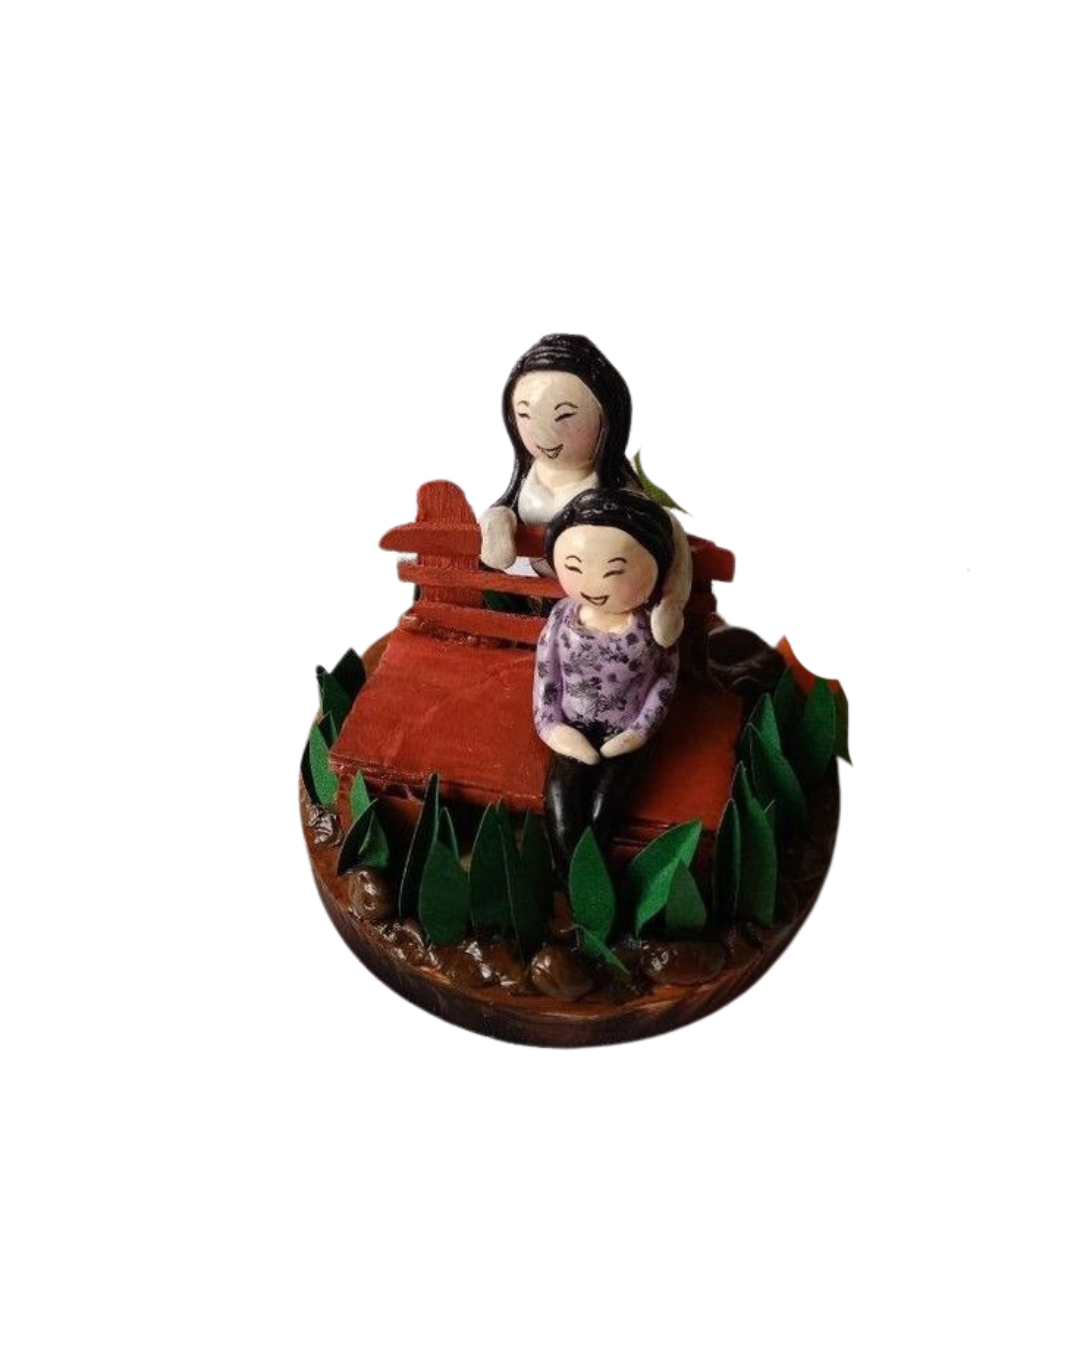 Wooden coaster with two girls clay sculpture sitting on a bench